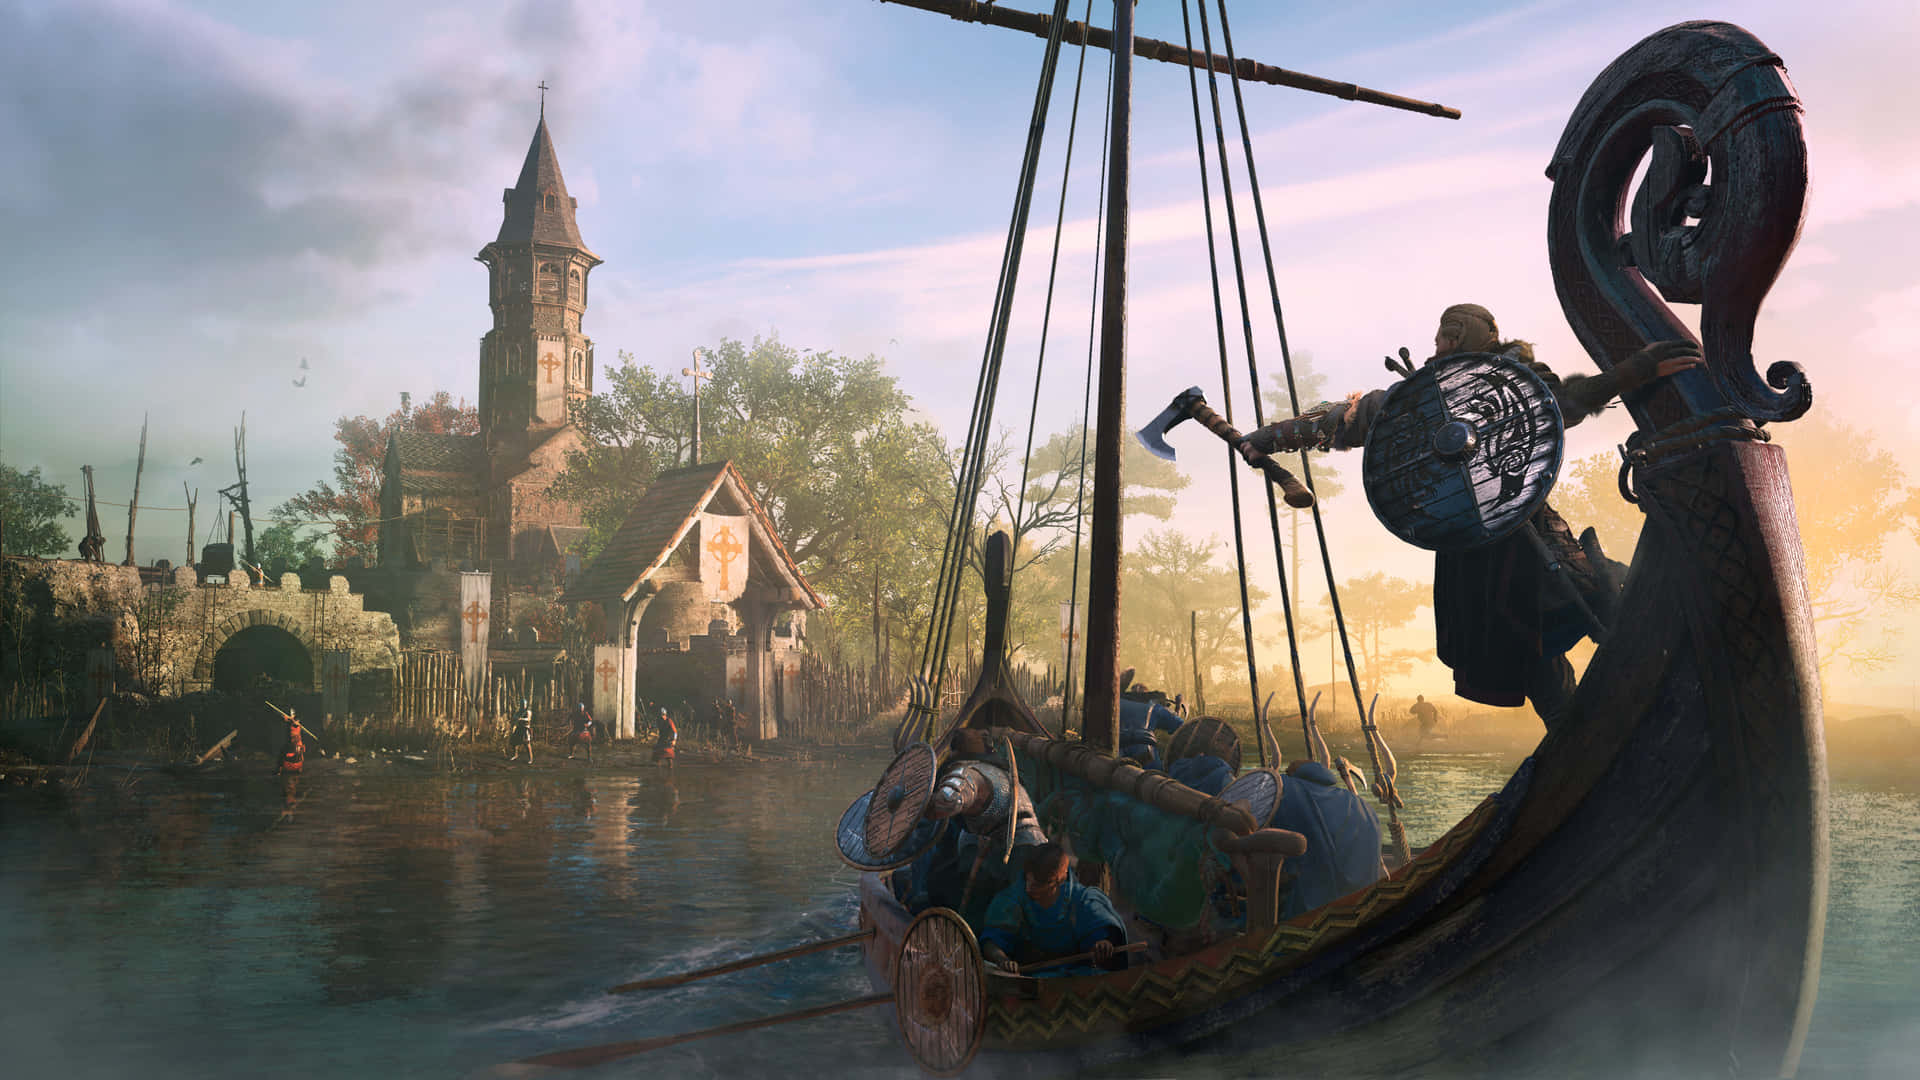 Explore the viking age and its rich history through Assassin's Creed Valhalla